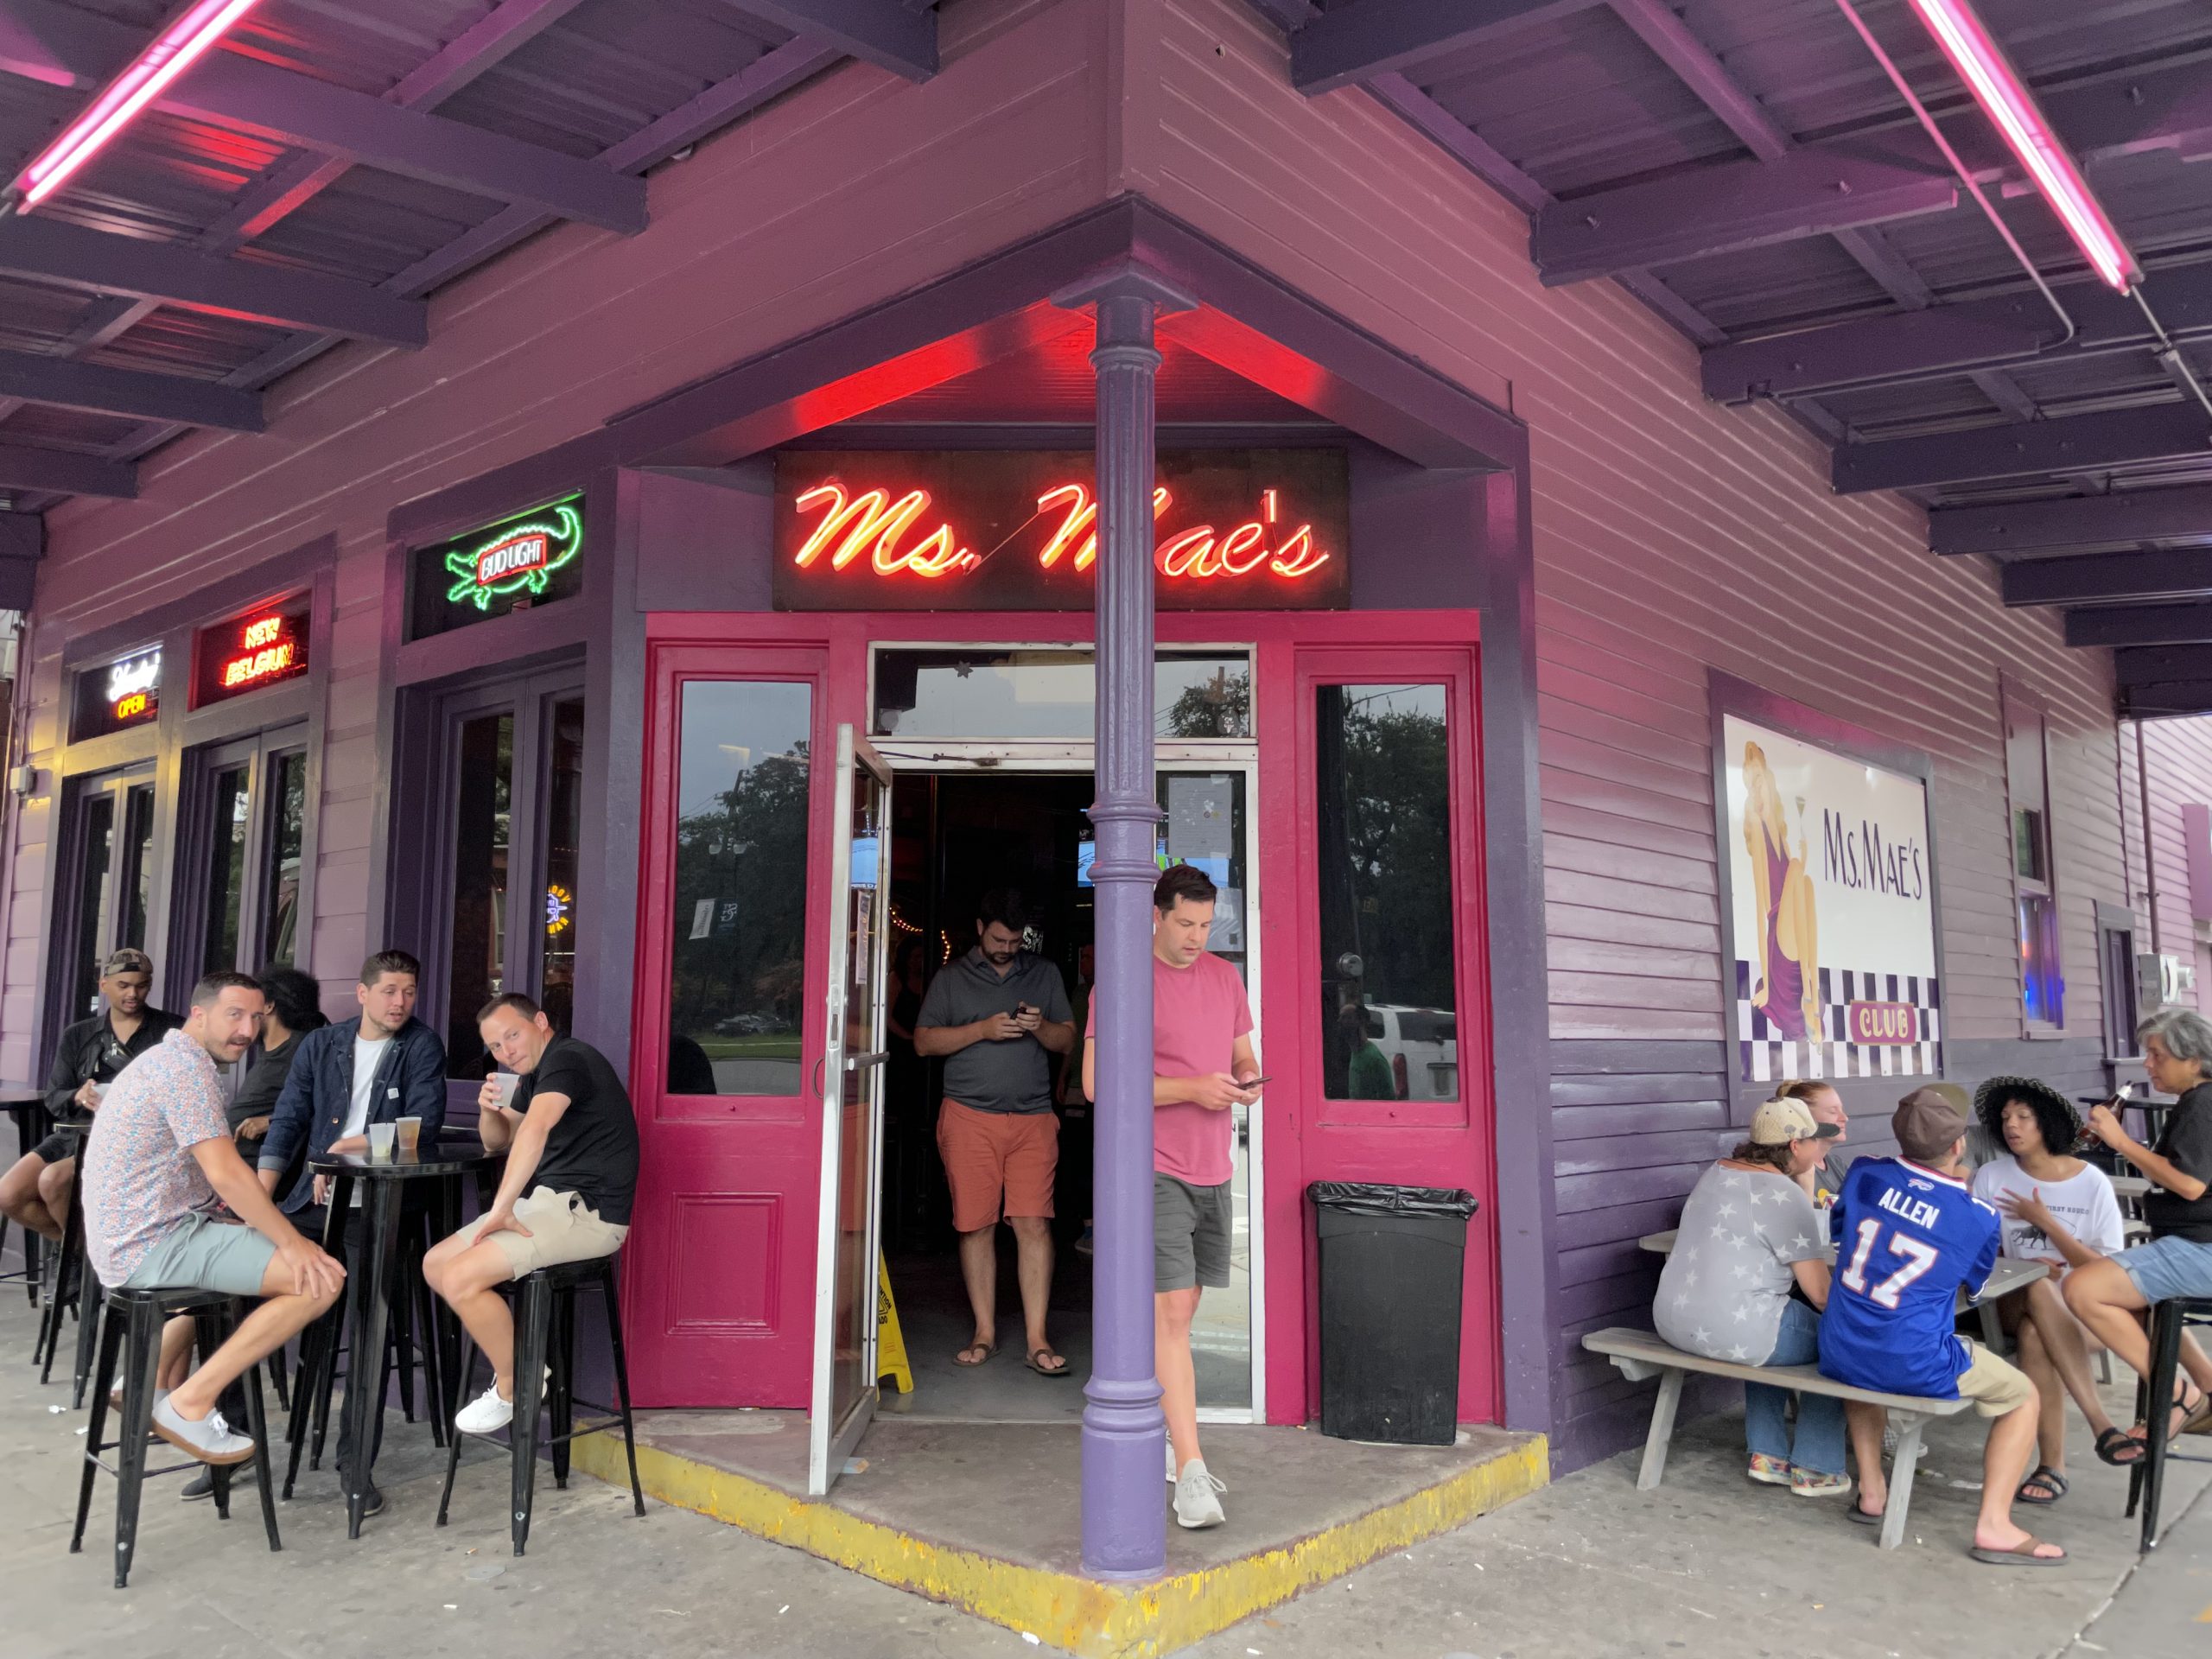 Ms. Mae's The Club - New Orleans Dive Bar - Entrance